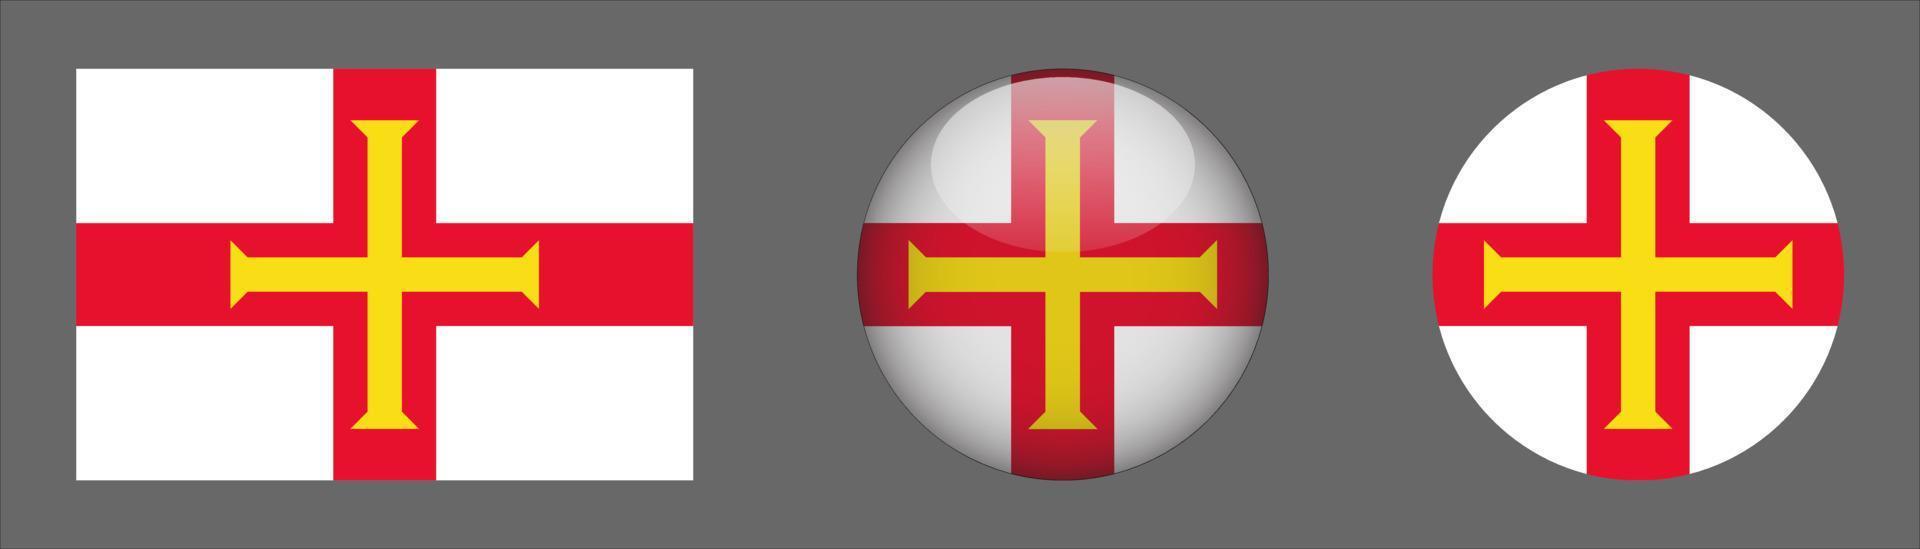 Guernsey Flag Set Collection, Original Size Ratio, 3d Rounded and Flat Rounded vector